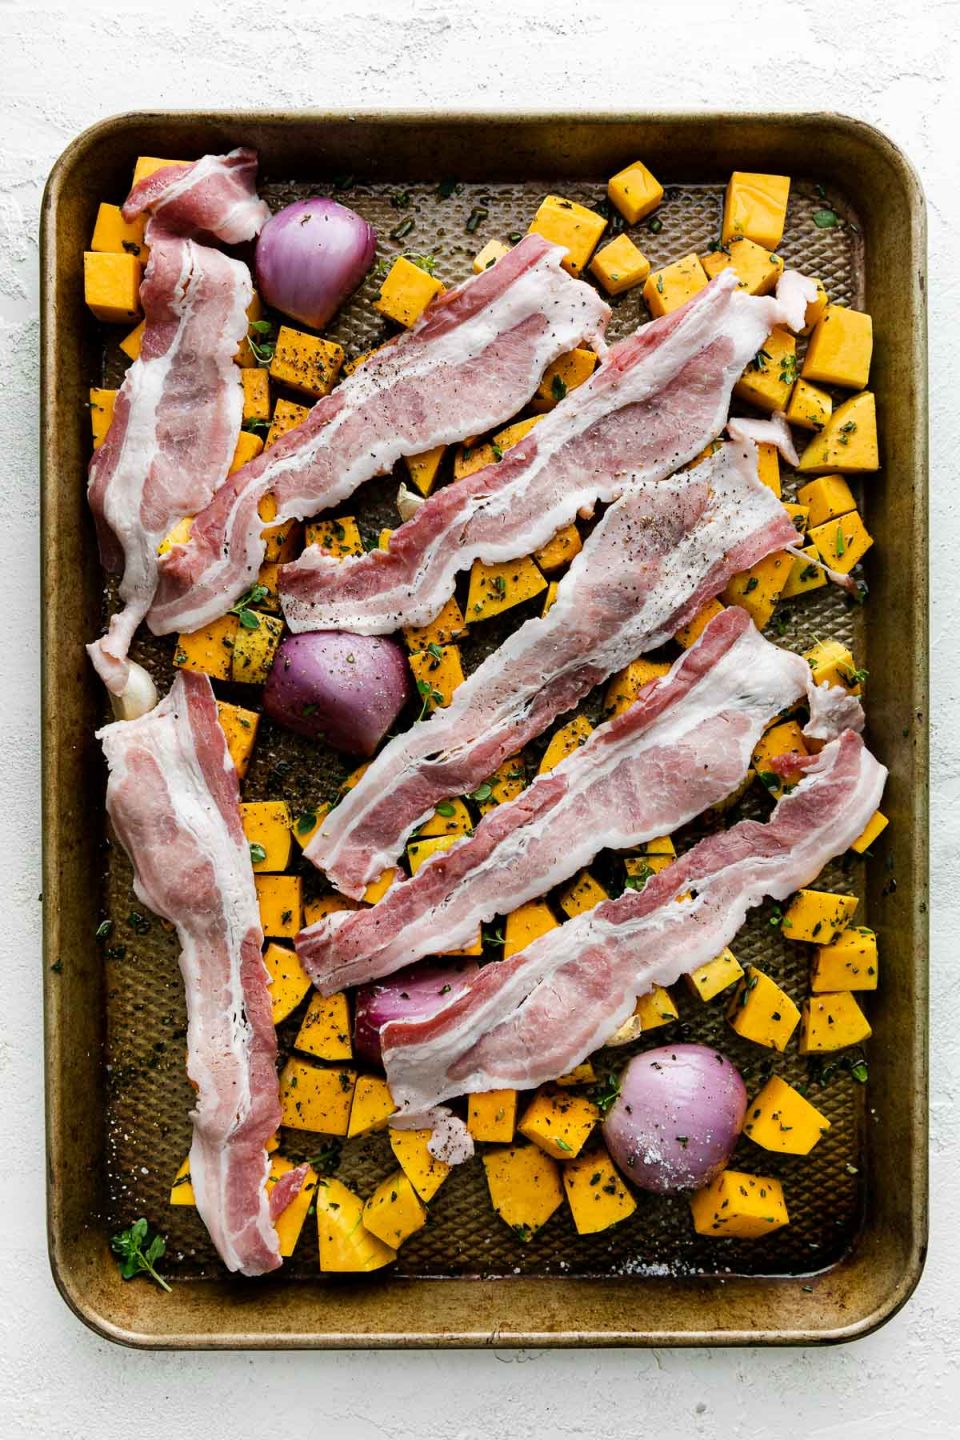 Cubed butternut squash, shallots, & garlic seasoned with olive oil & fresh herbs with bacon draped over top on a baking sheet before roasting. The baking sheet sits atop a white textured surface.